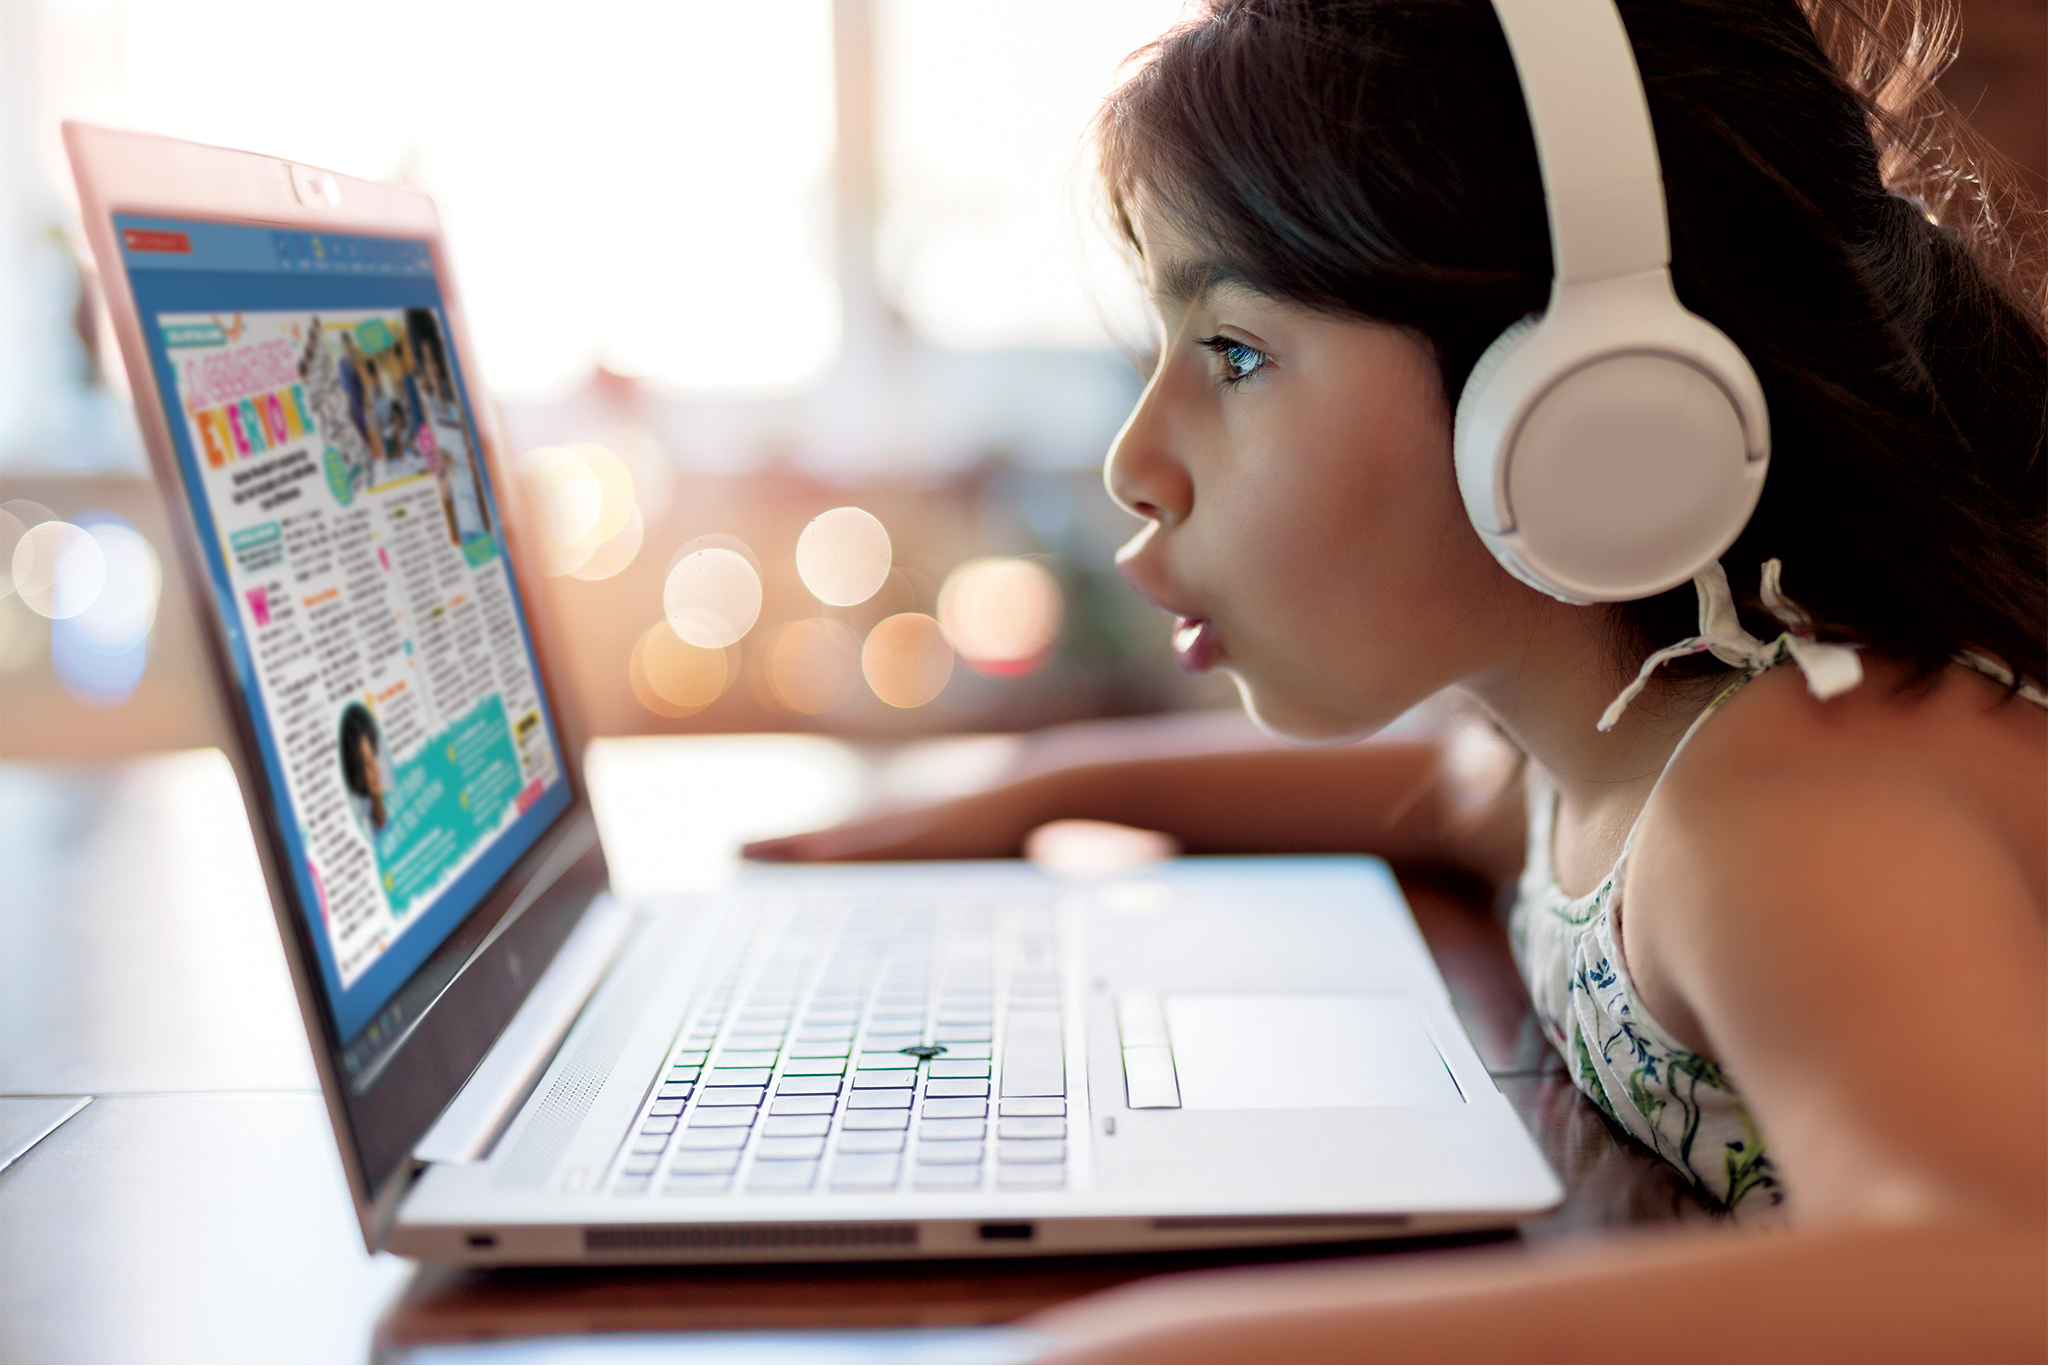 A girl wearing headphones and looking at a laptop